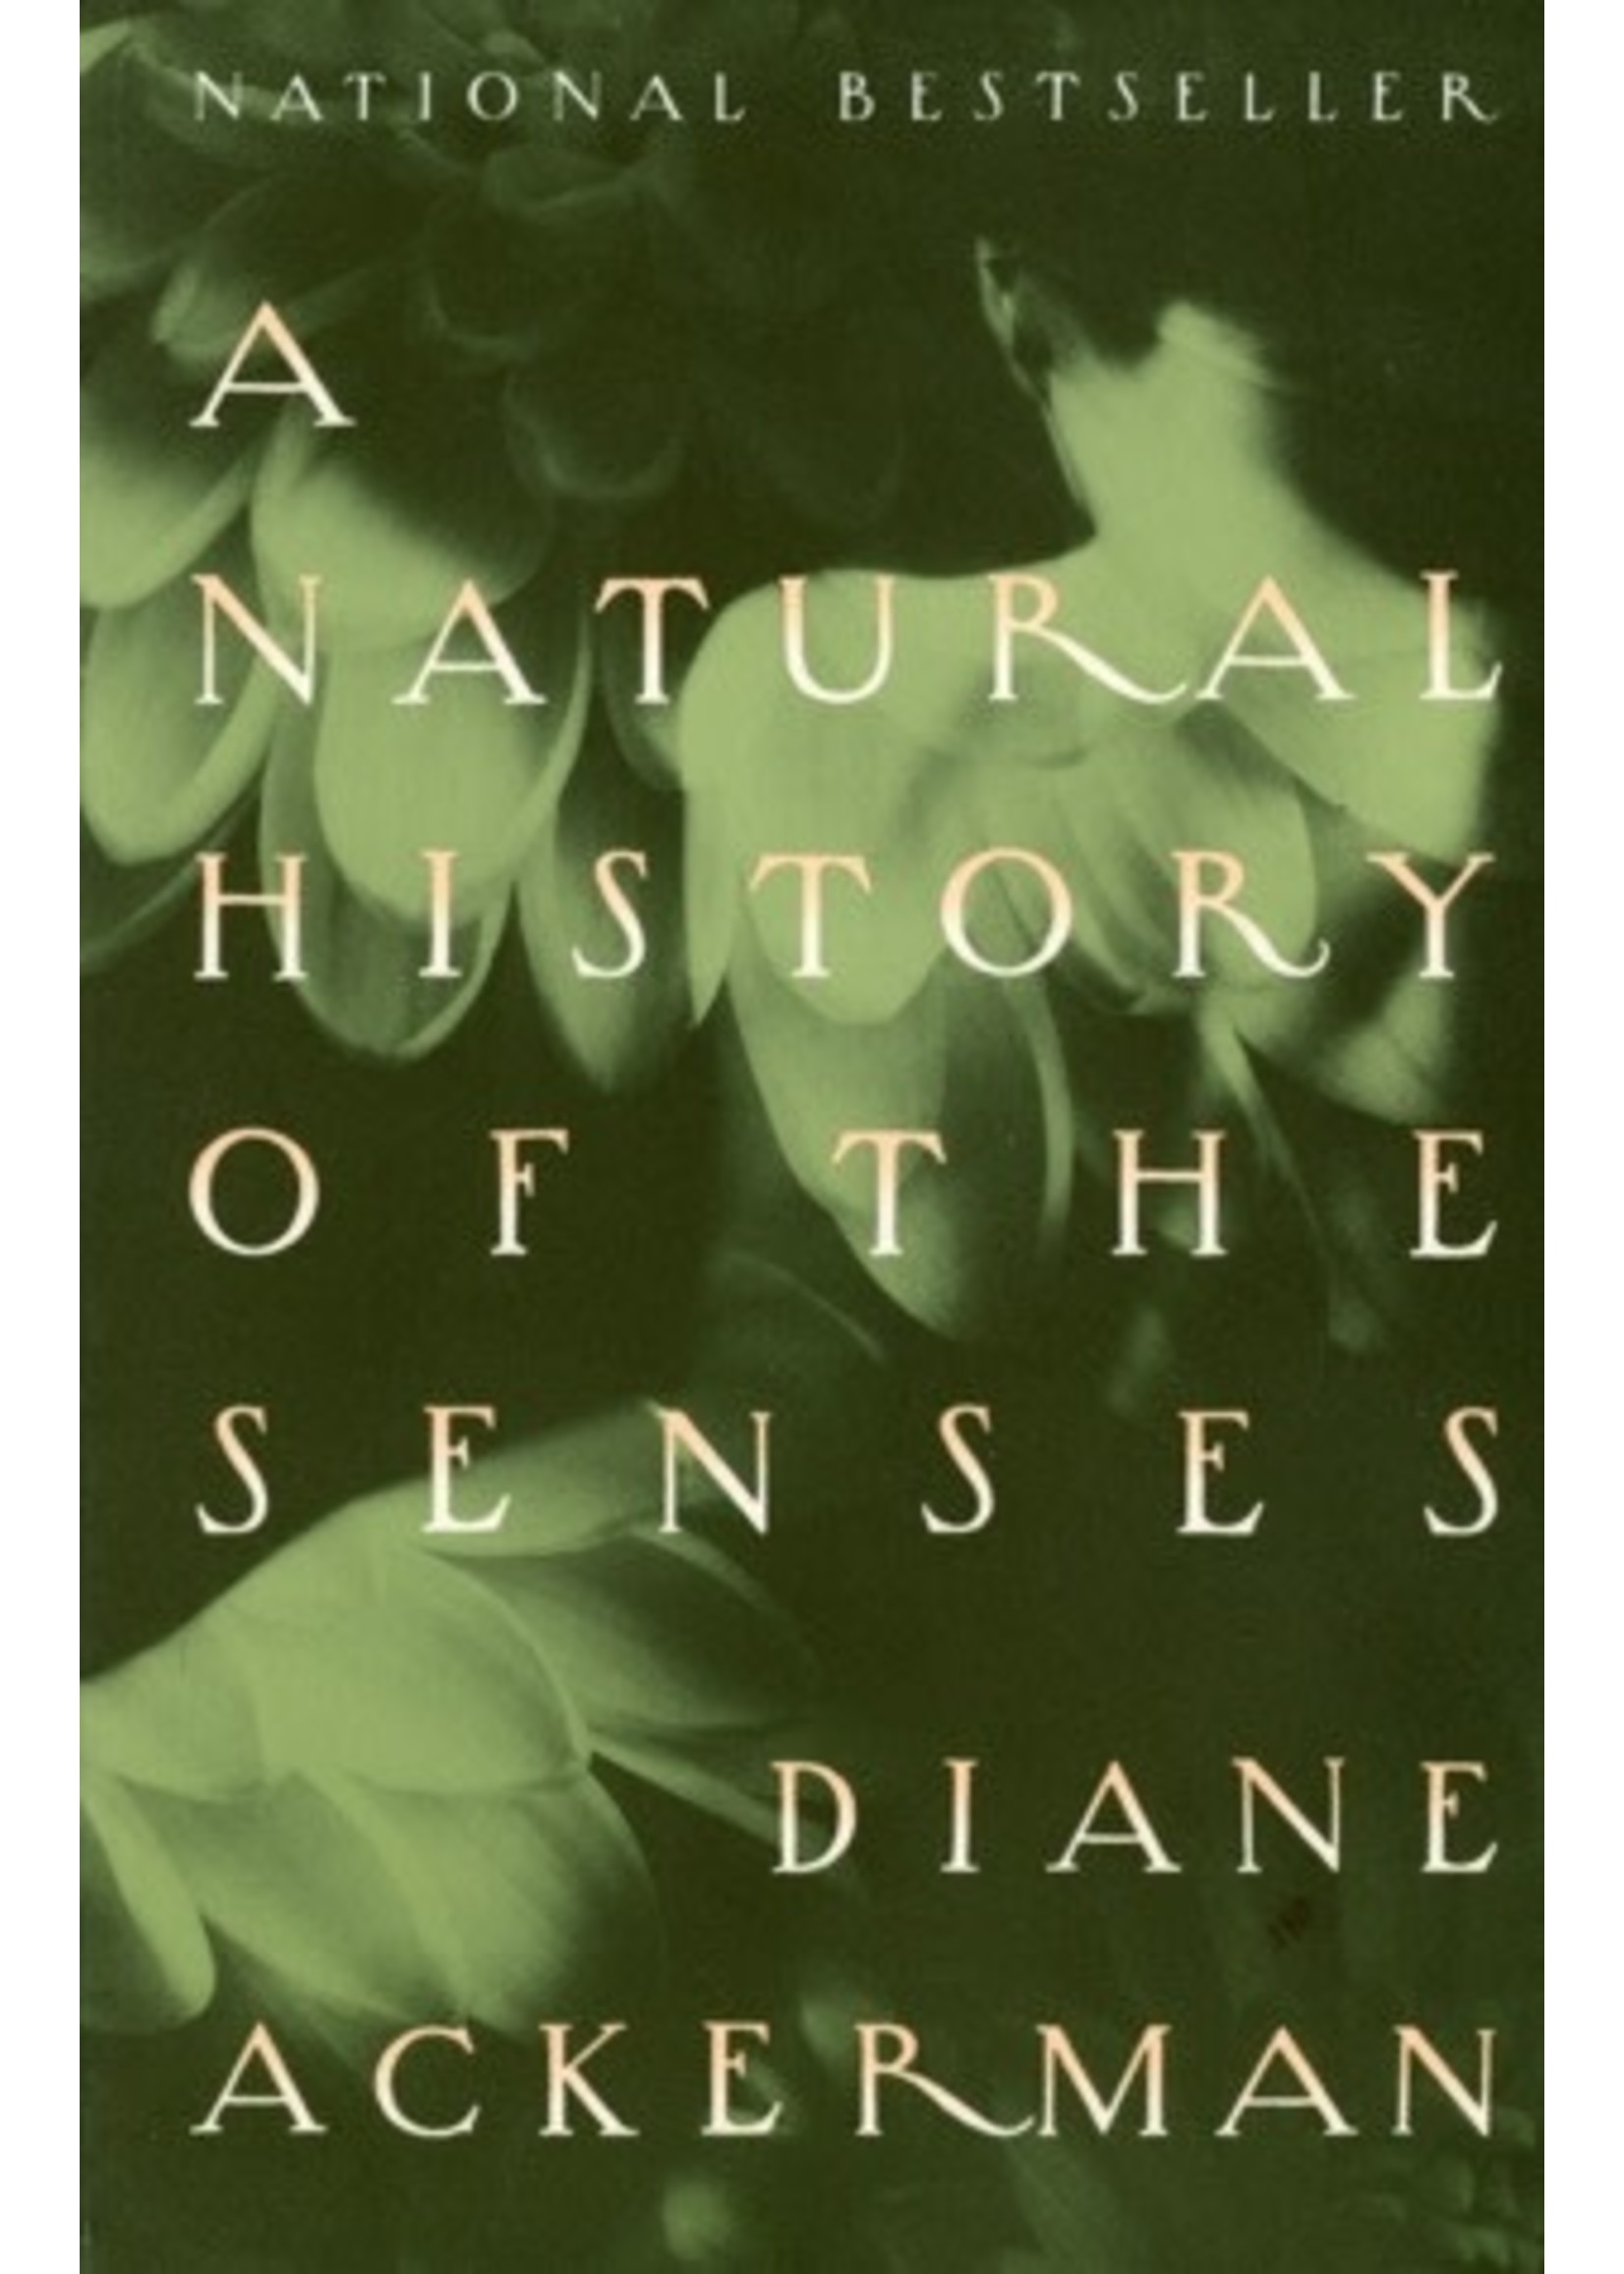 A Natural History of the Senses by Diane Ackerman